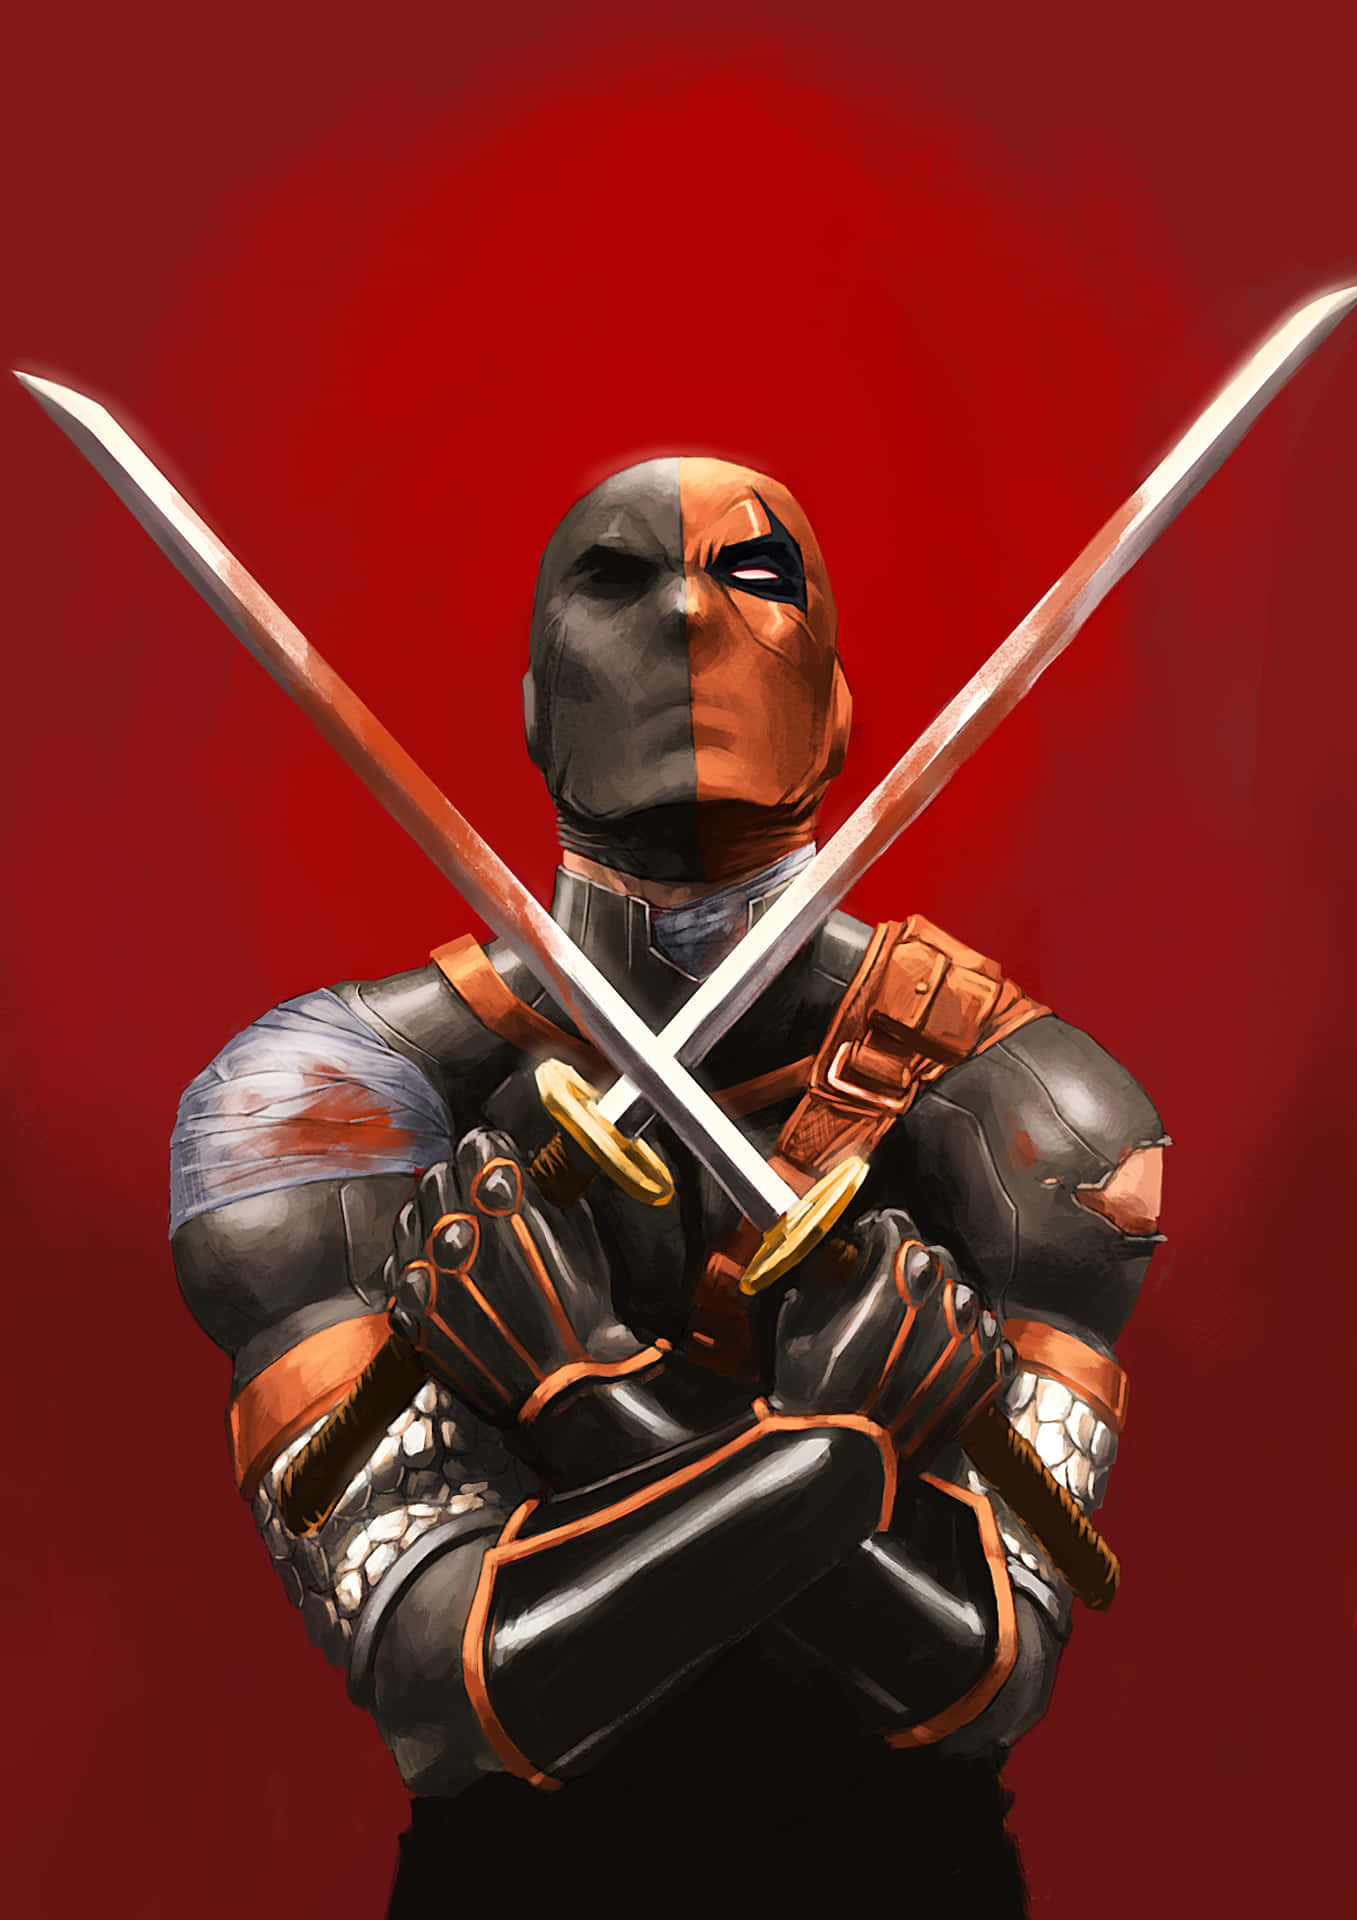 The darkness of Deathstroke